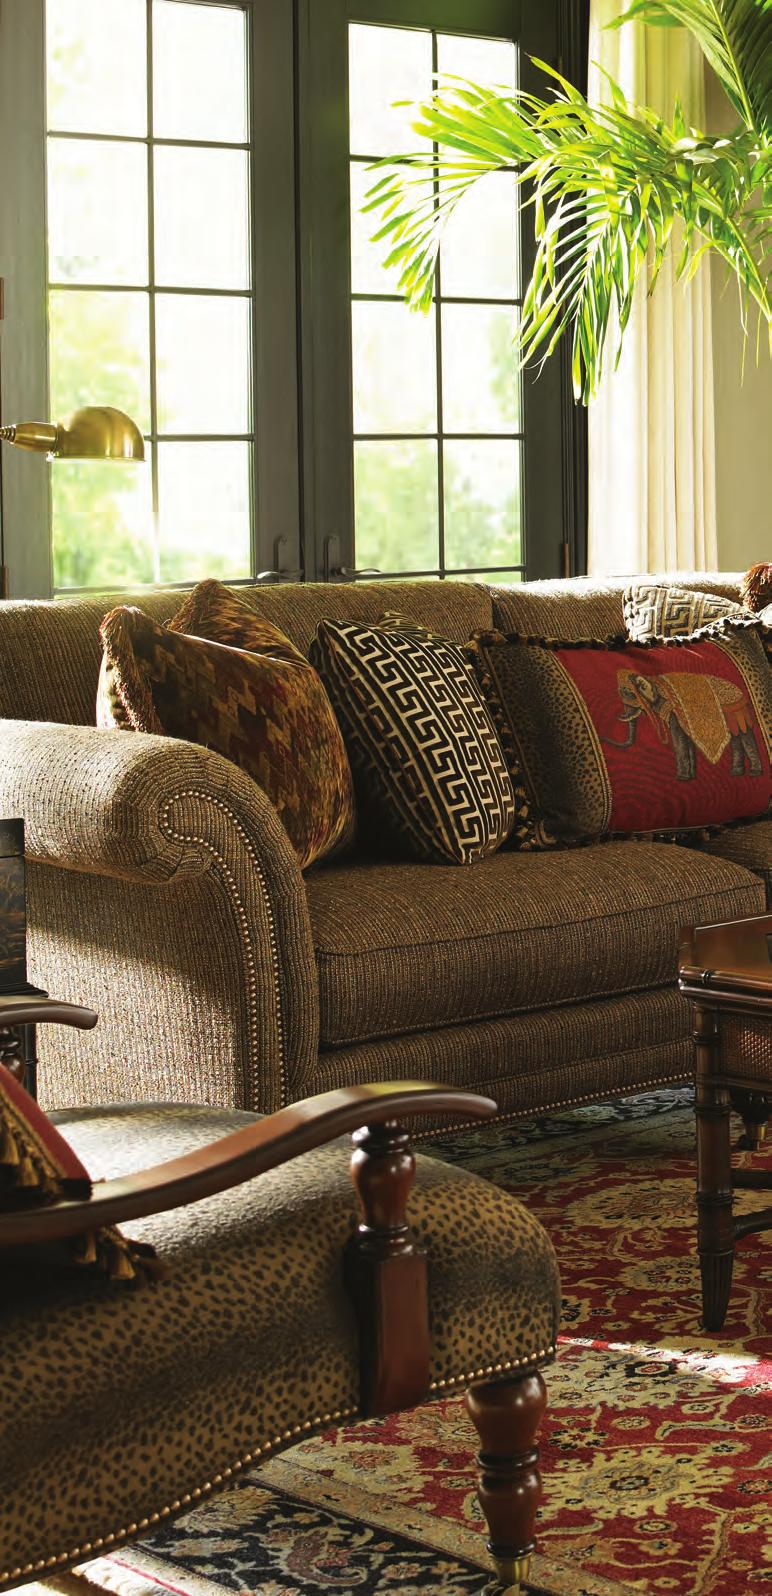 Living Room Layers of color, pattern, and texture are the hallmark of sophisticated upholstery design.